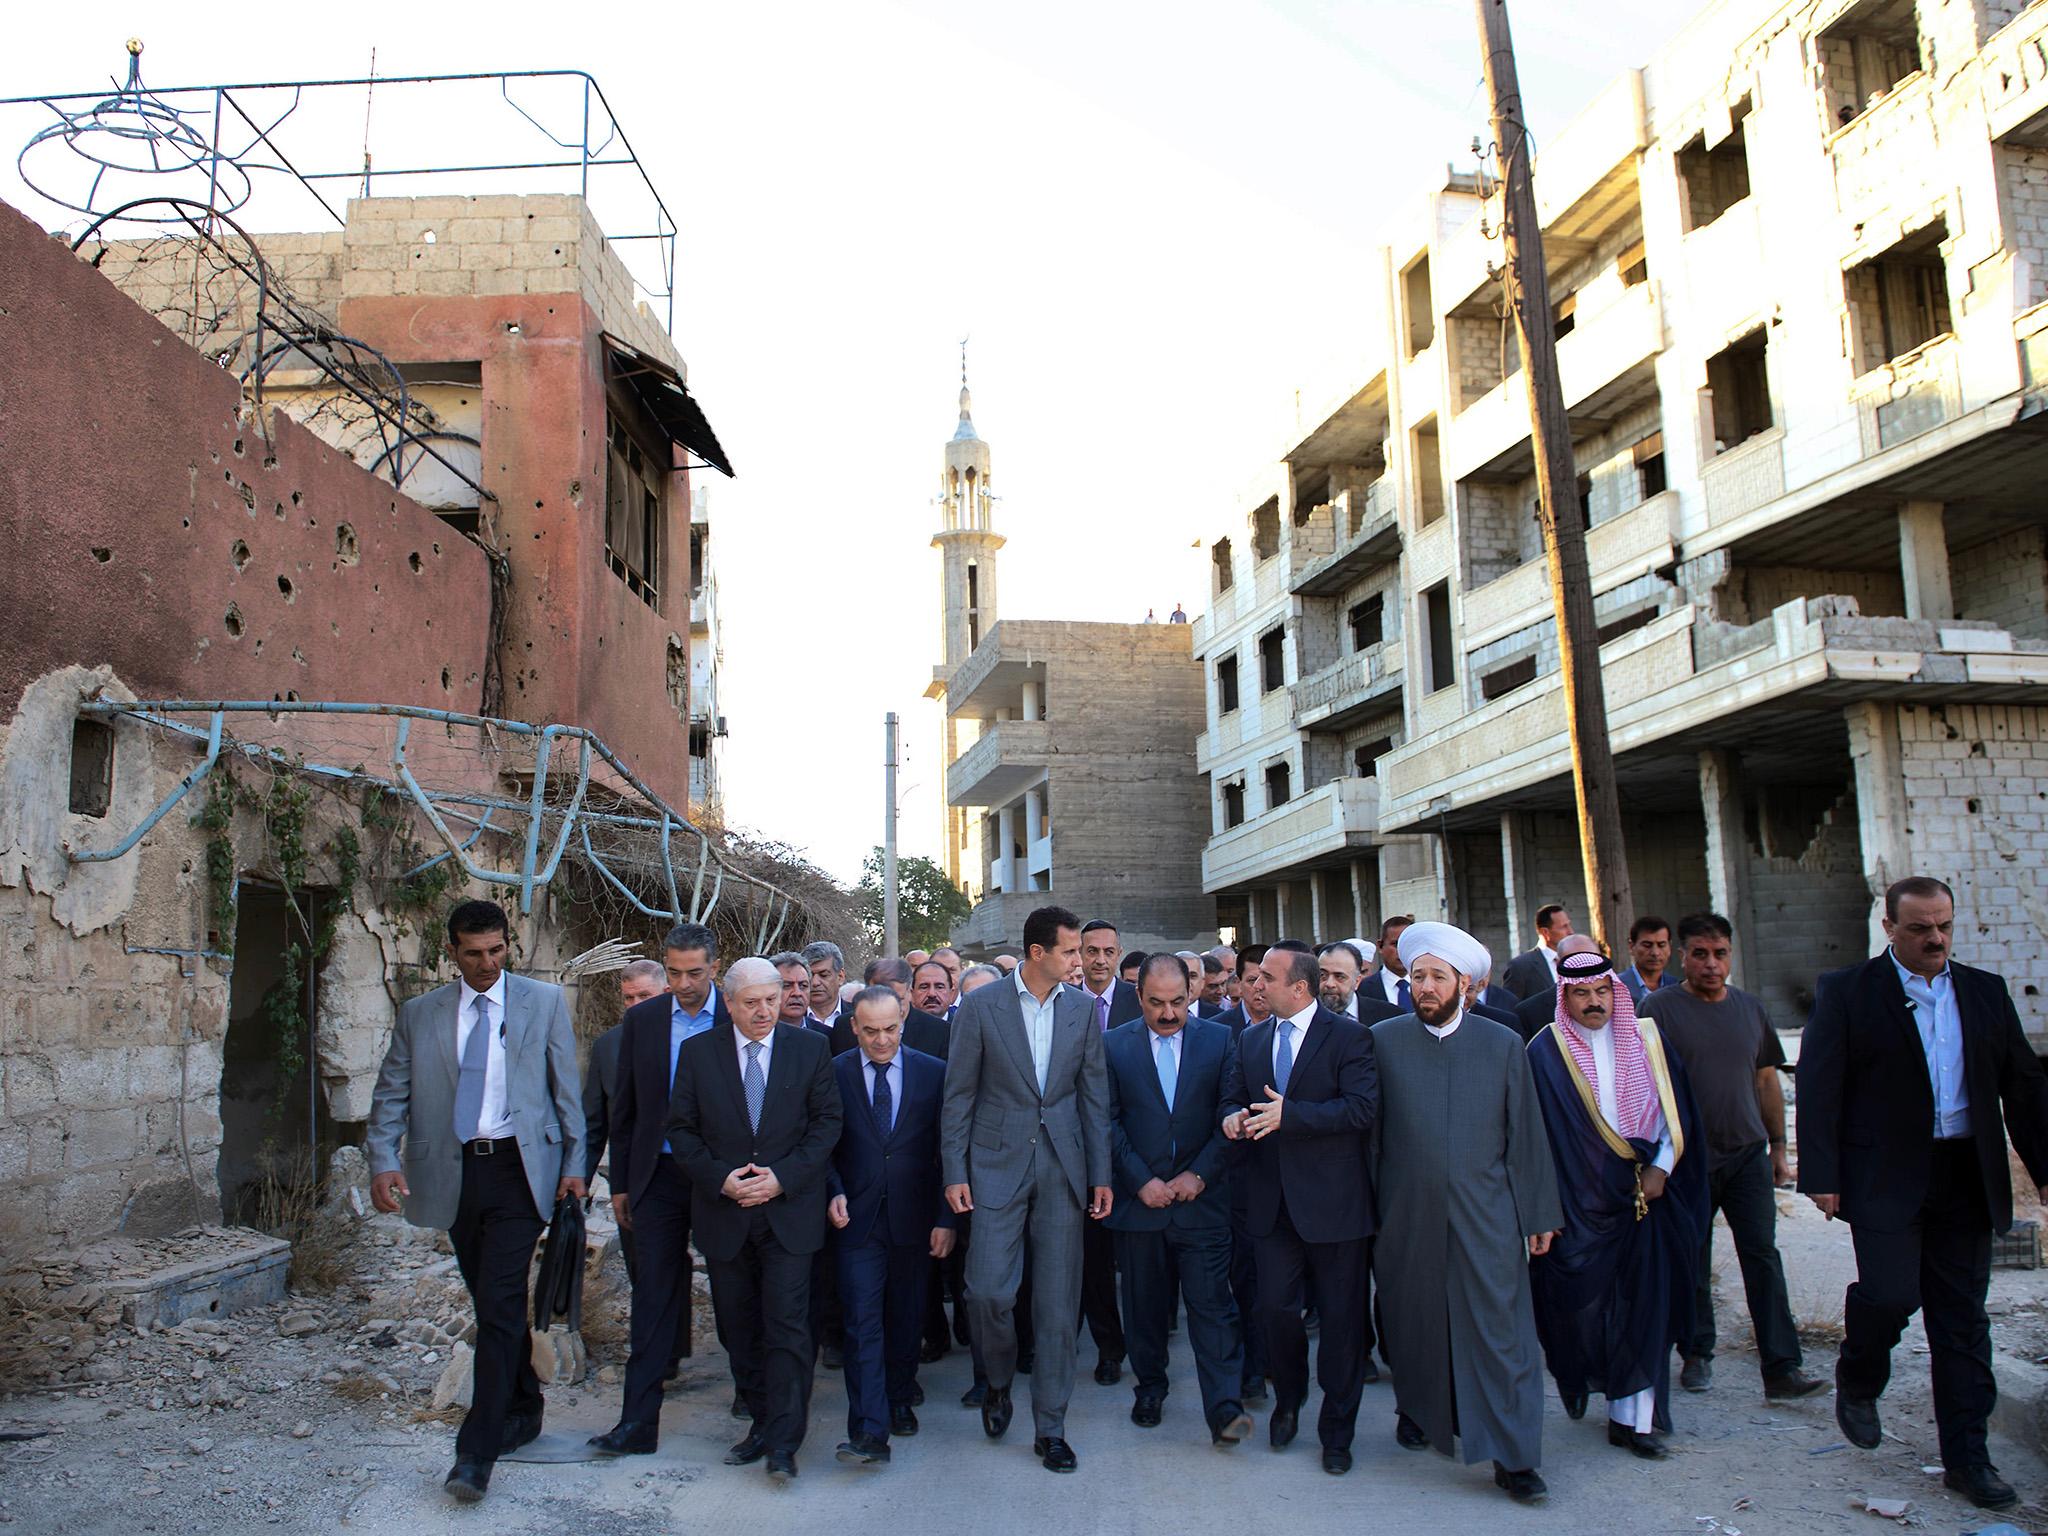 Syrian President Bashar al-Assad walking in a damaged Damascus suburb ahead of morning Eid Al-Adha prayers just hours ahead of the start of a ceasefire brokered by the US and Russia.